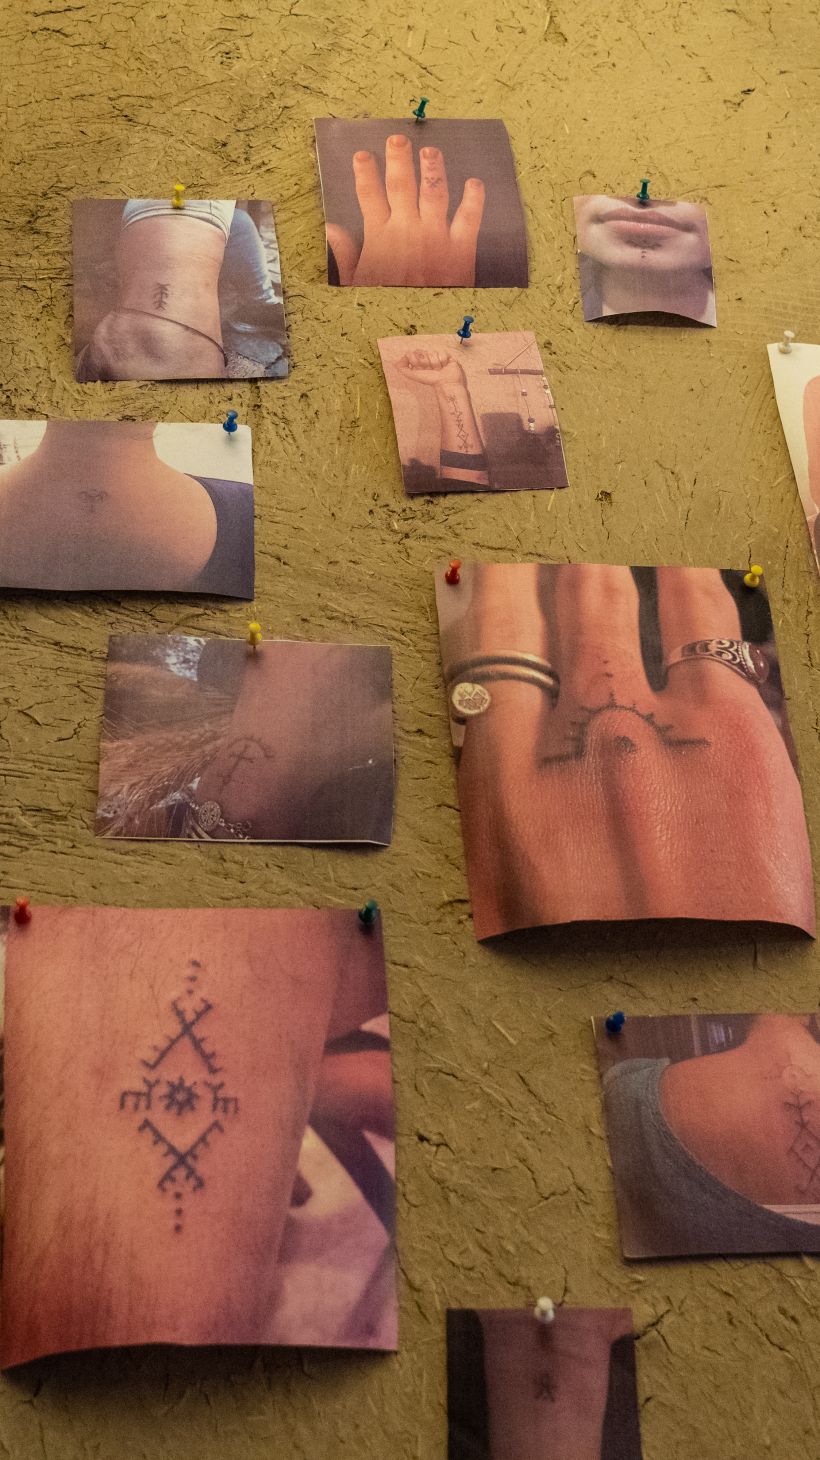 A photo of photos on the walls of a studio, showing traditional deq symbols and motifs